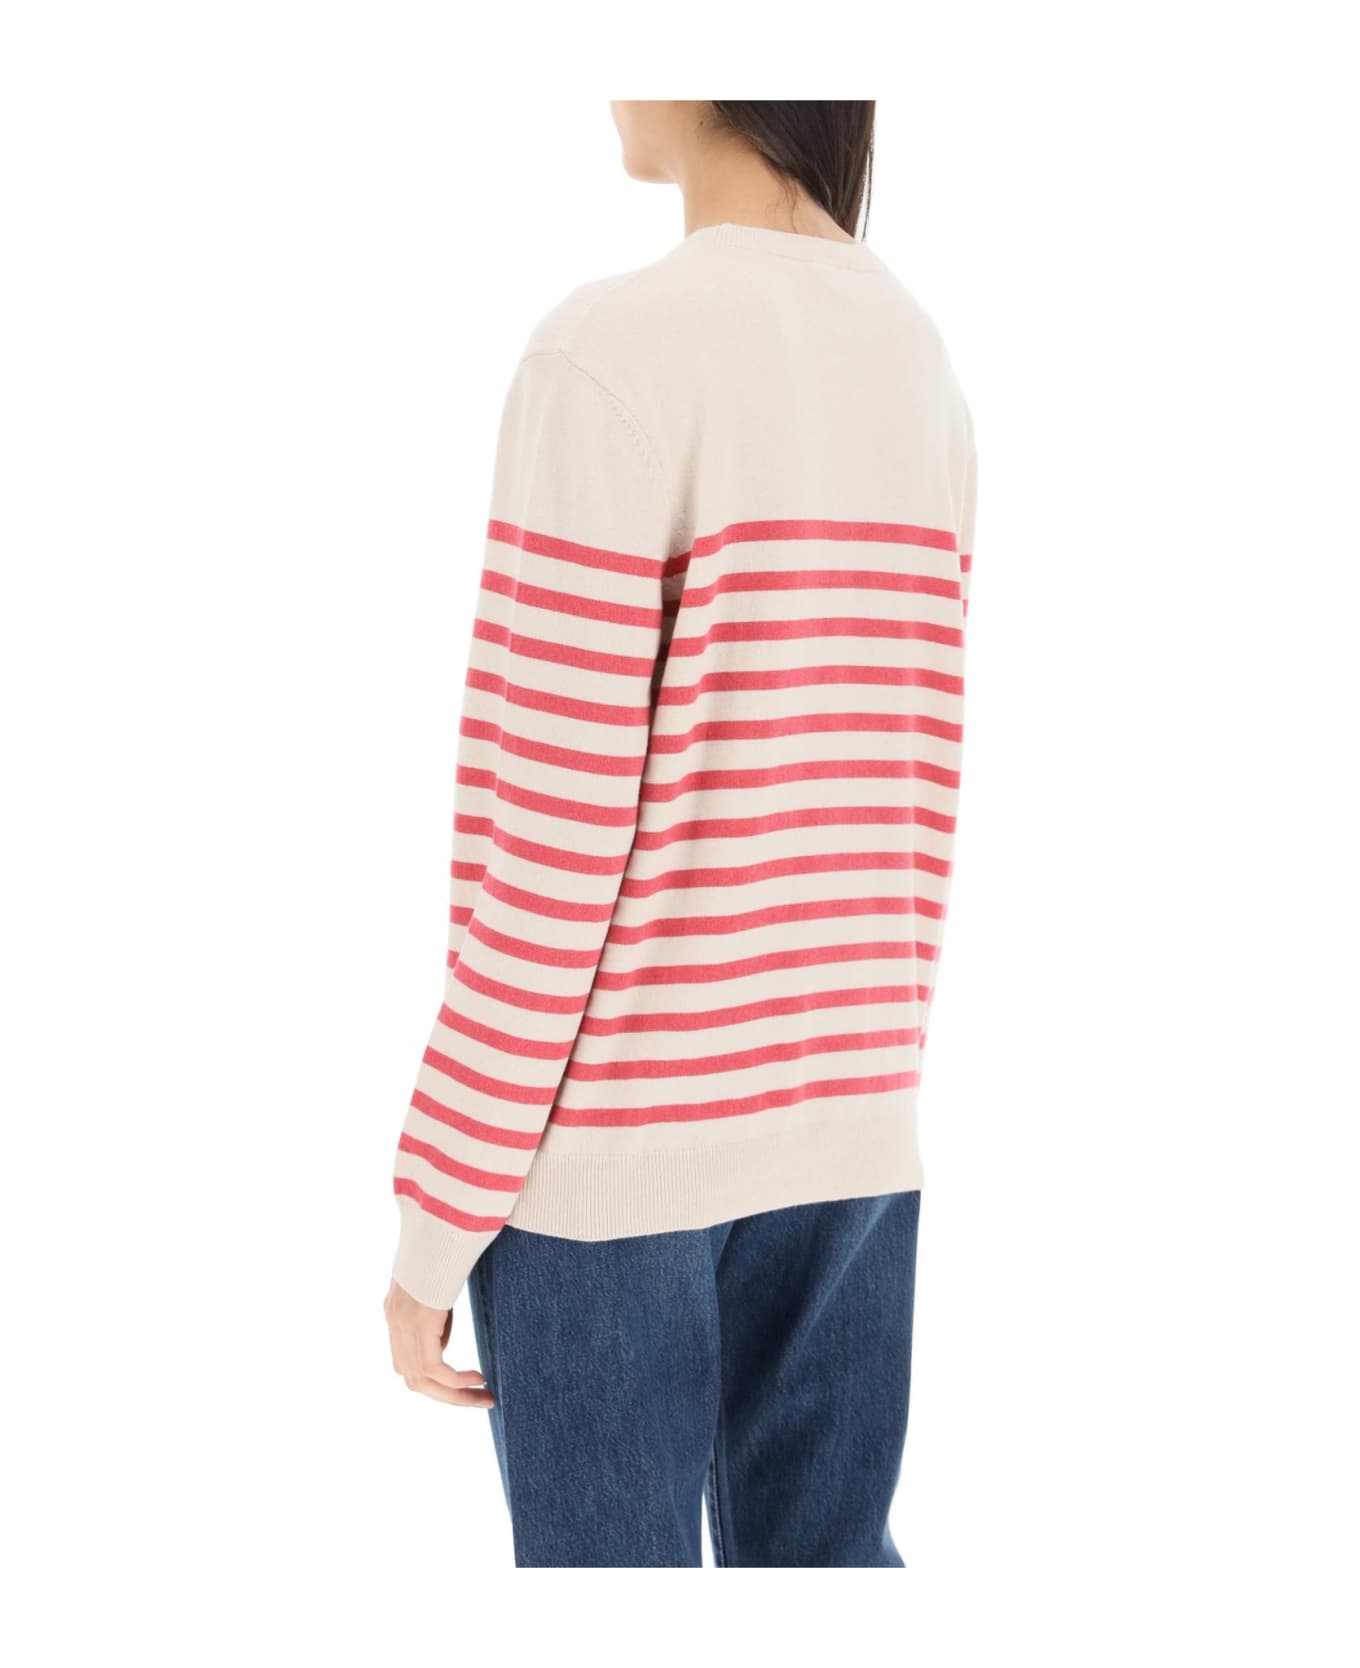 A.P.C. 'phoebe' Striped Cashmere And Cotton Sweater - Beige